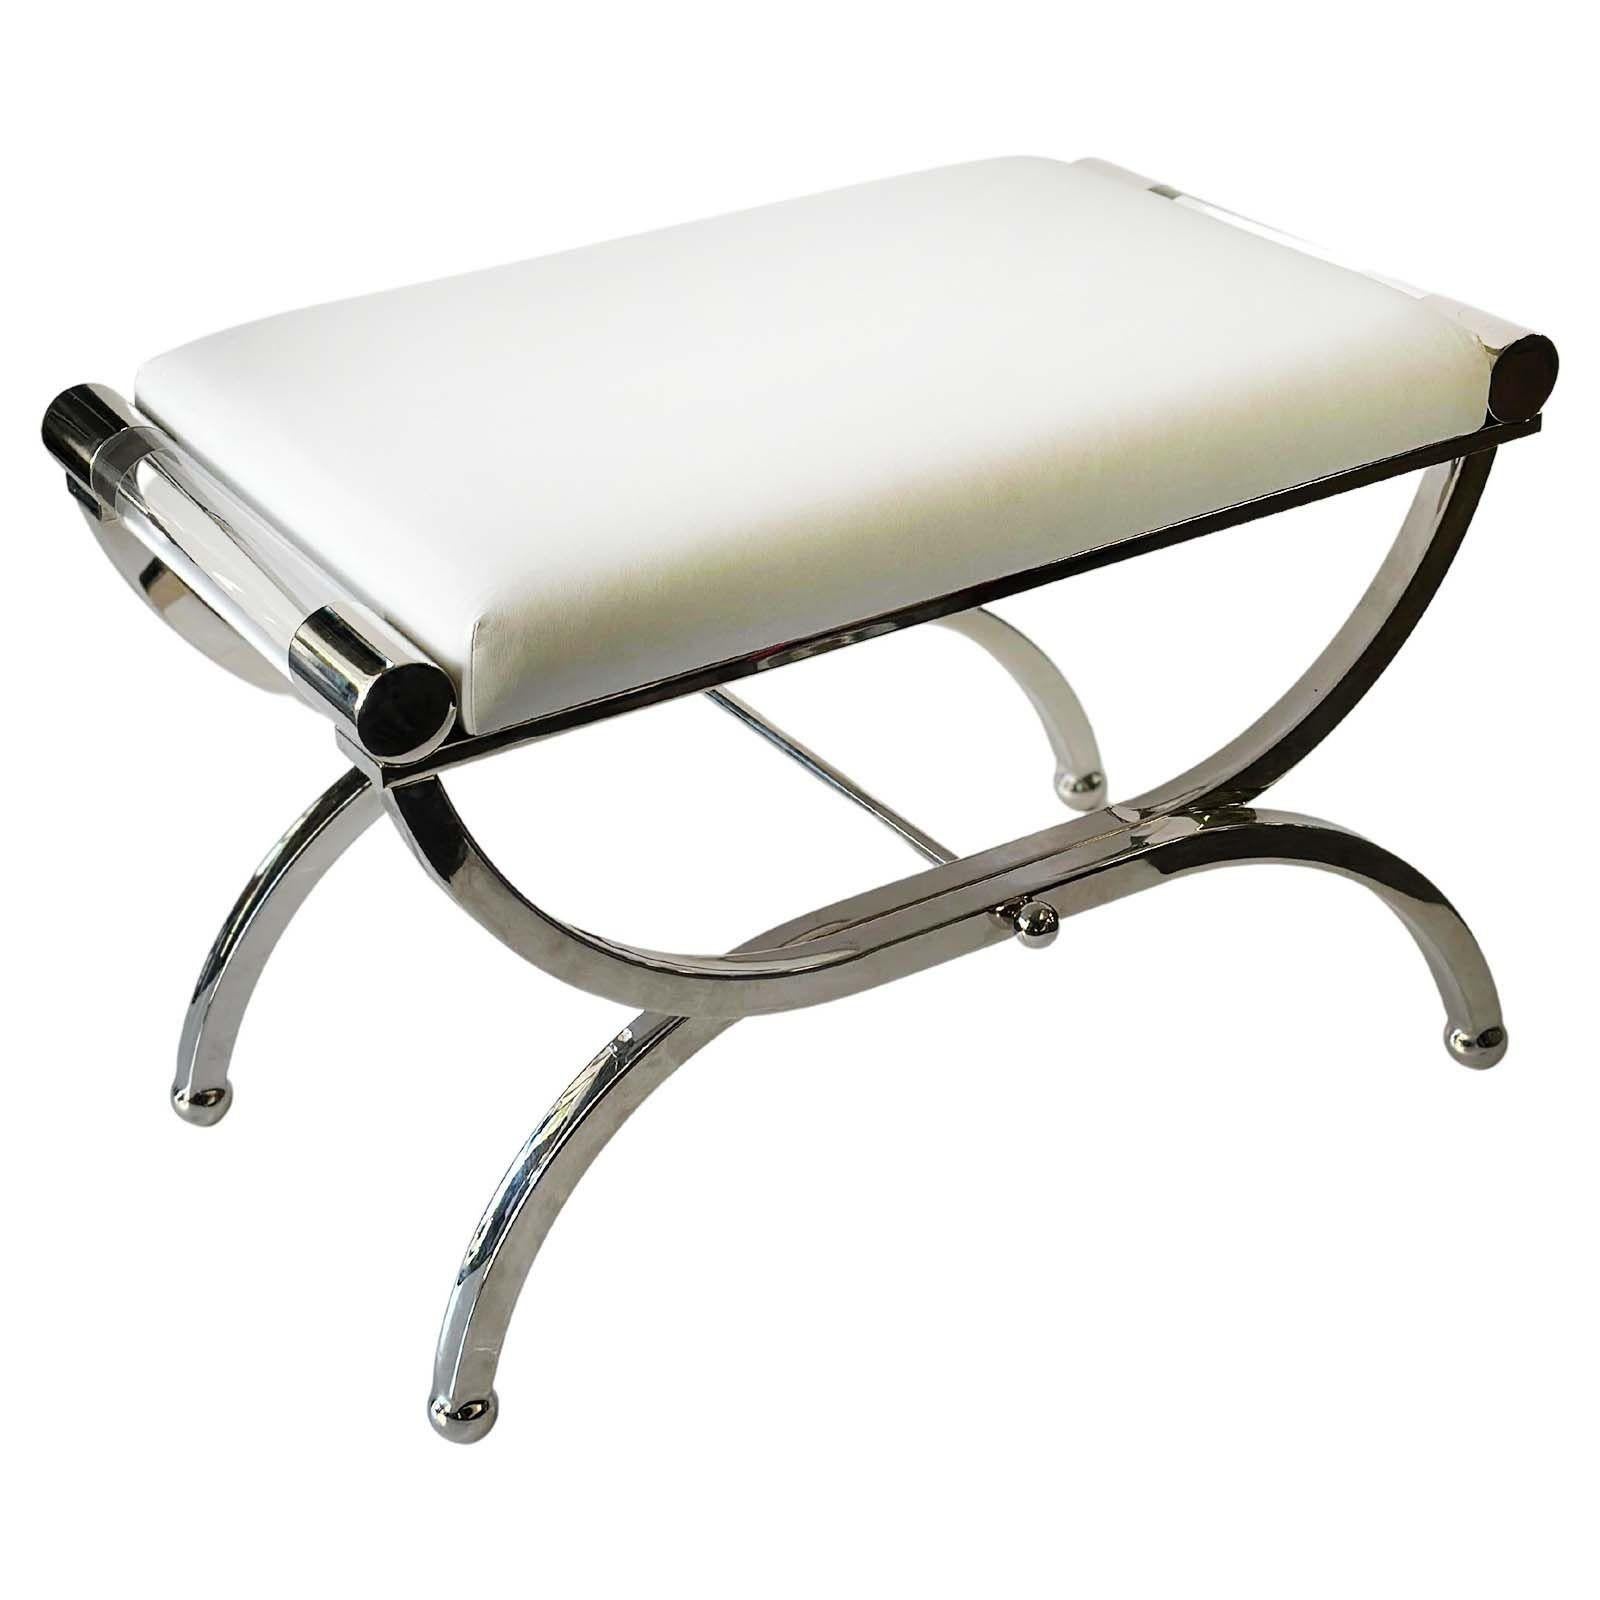 American Pair of Lucite & Polished Nickel Benches by Charles Hollis Jones, c. 1980's For Sale